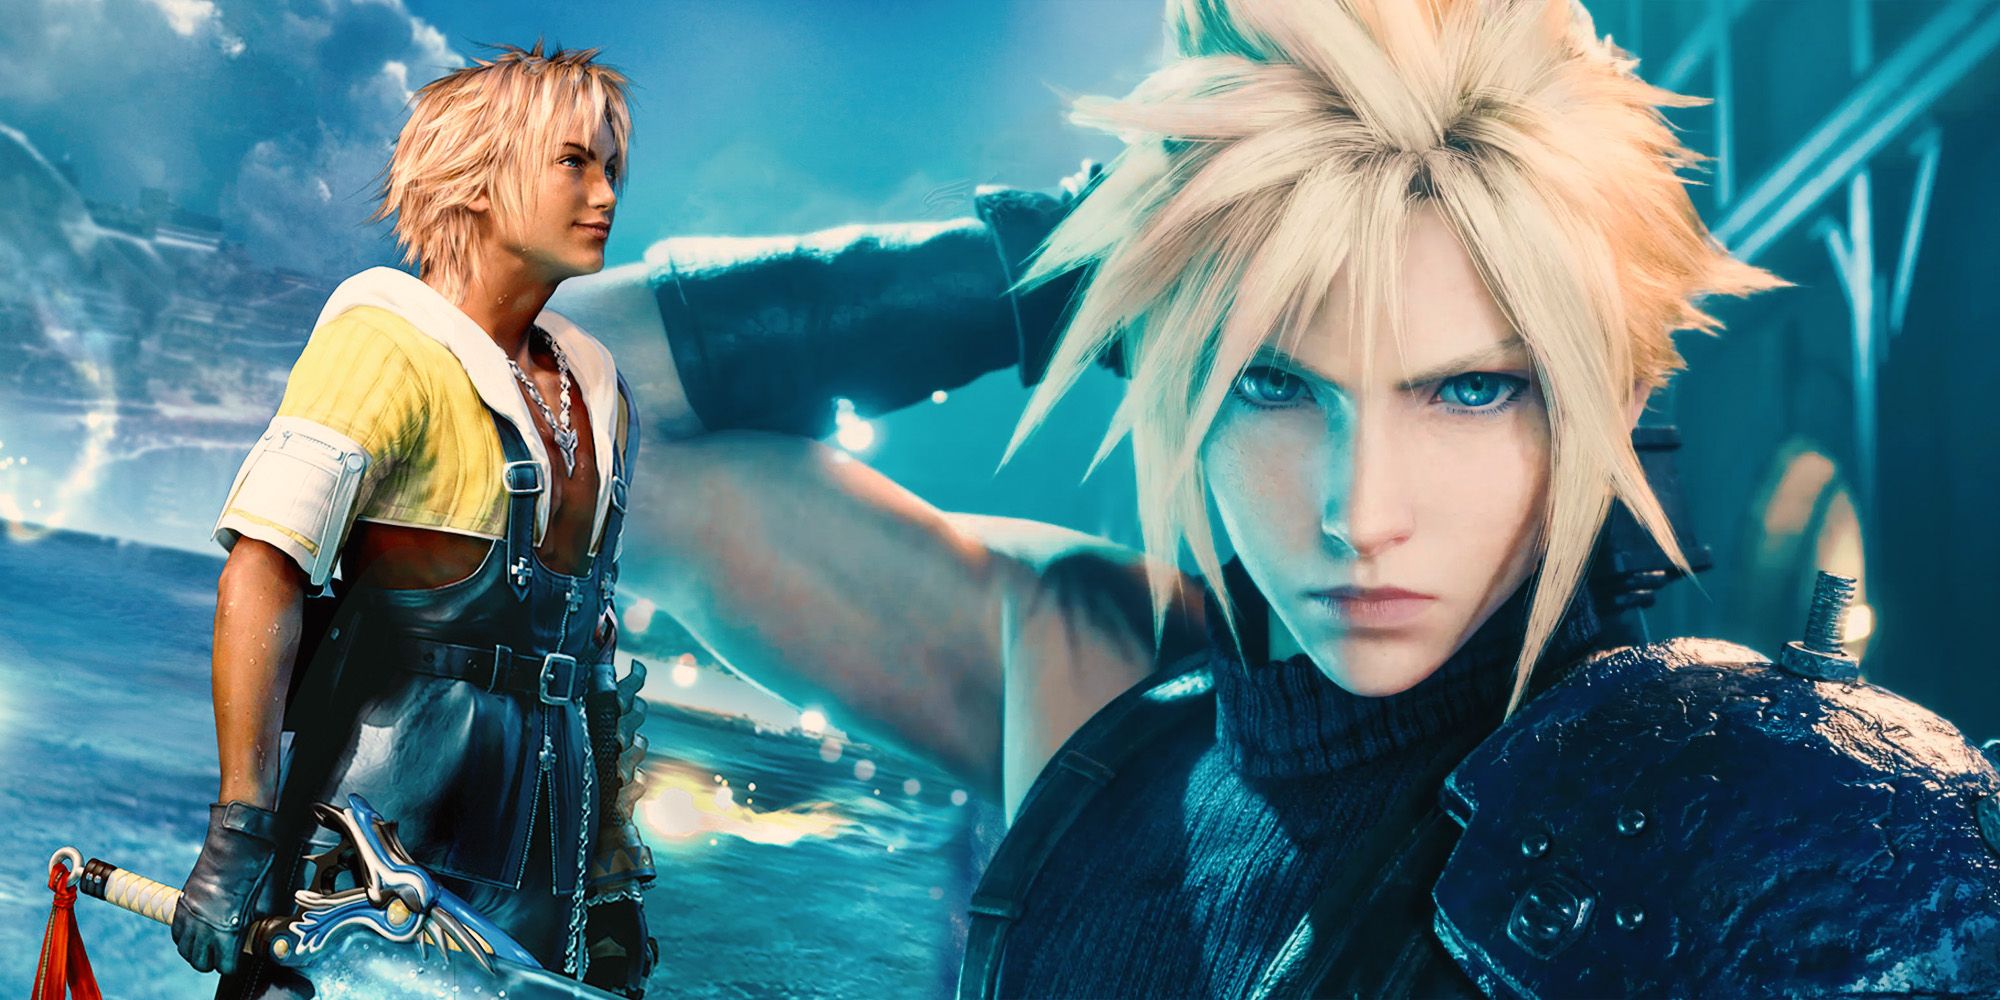 Tidus and Cloud having a starring contest over who has the better blond hairdo.